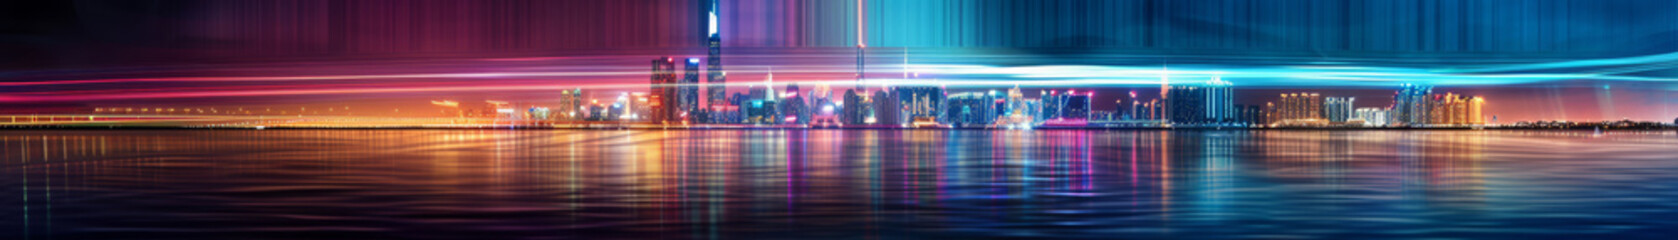 Surreal Cityscape Waterfront at Night with Colorful Light Trails